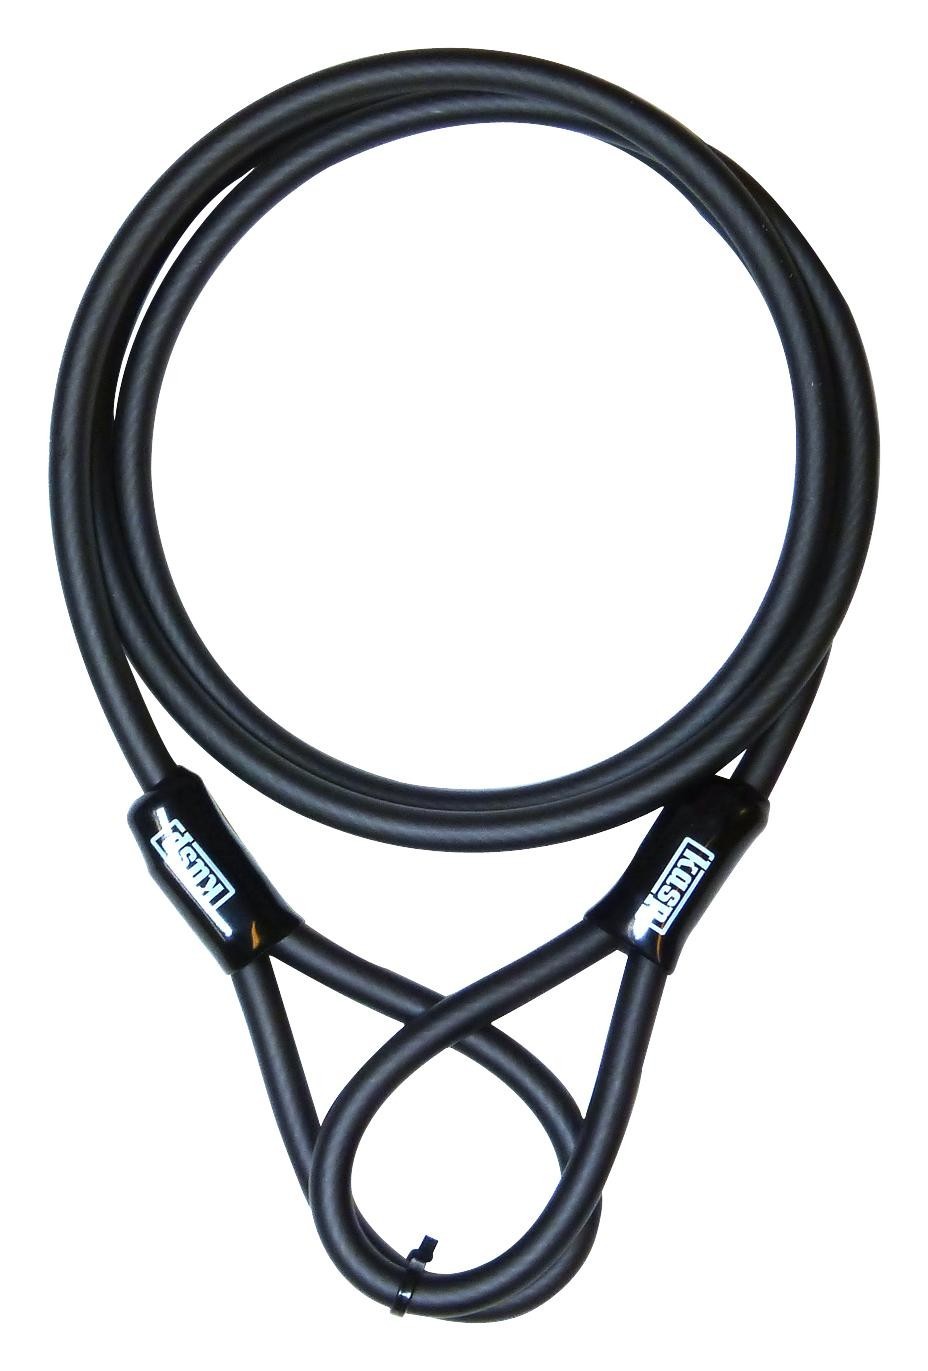 Kasp Security K4551018D Double Loop Security Cable, 10 X 1800mm